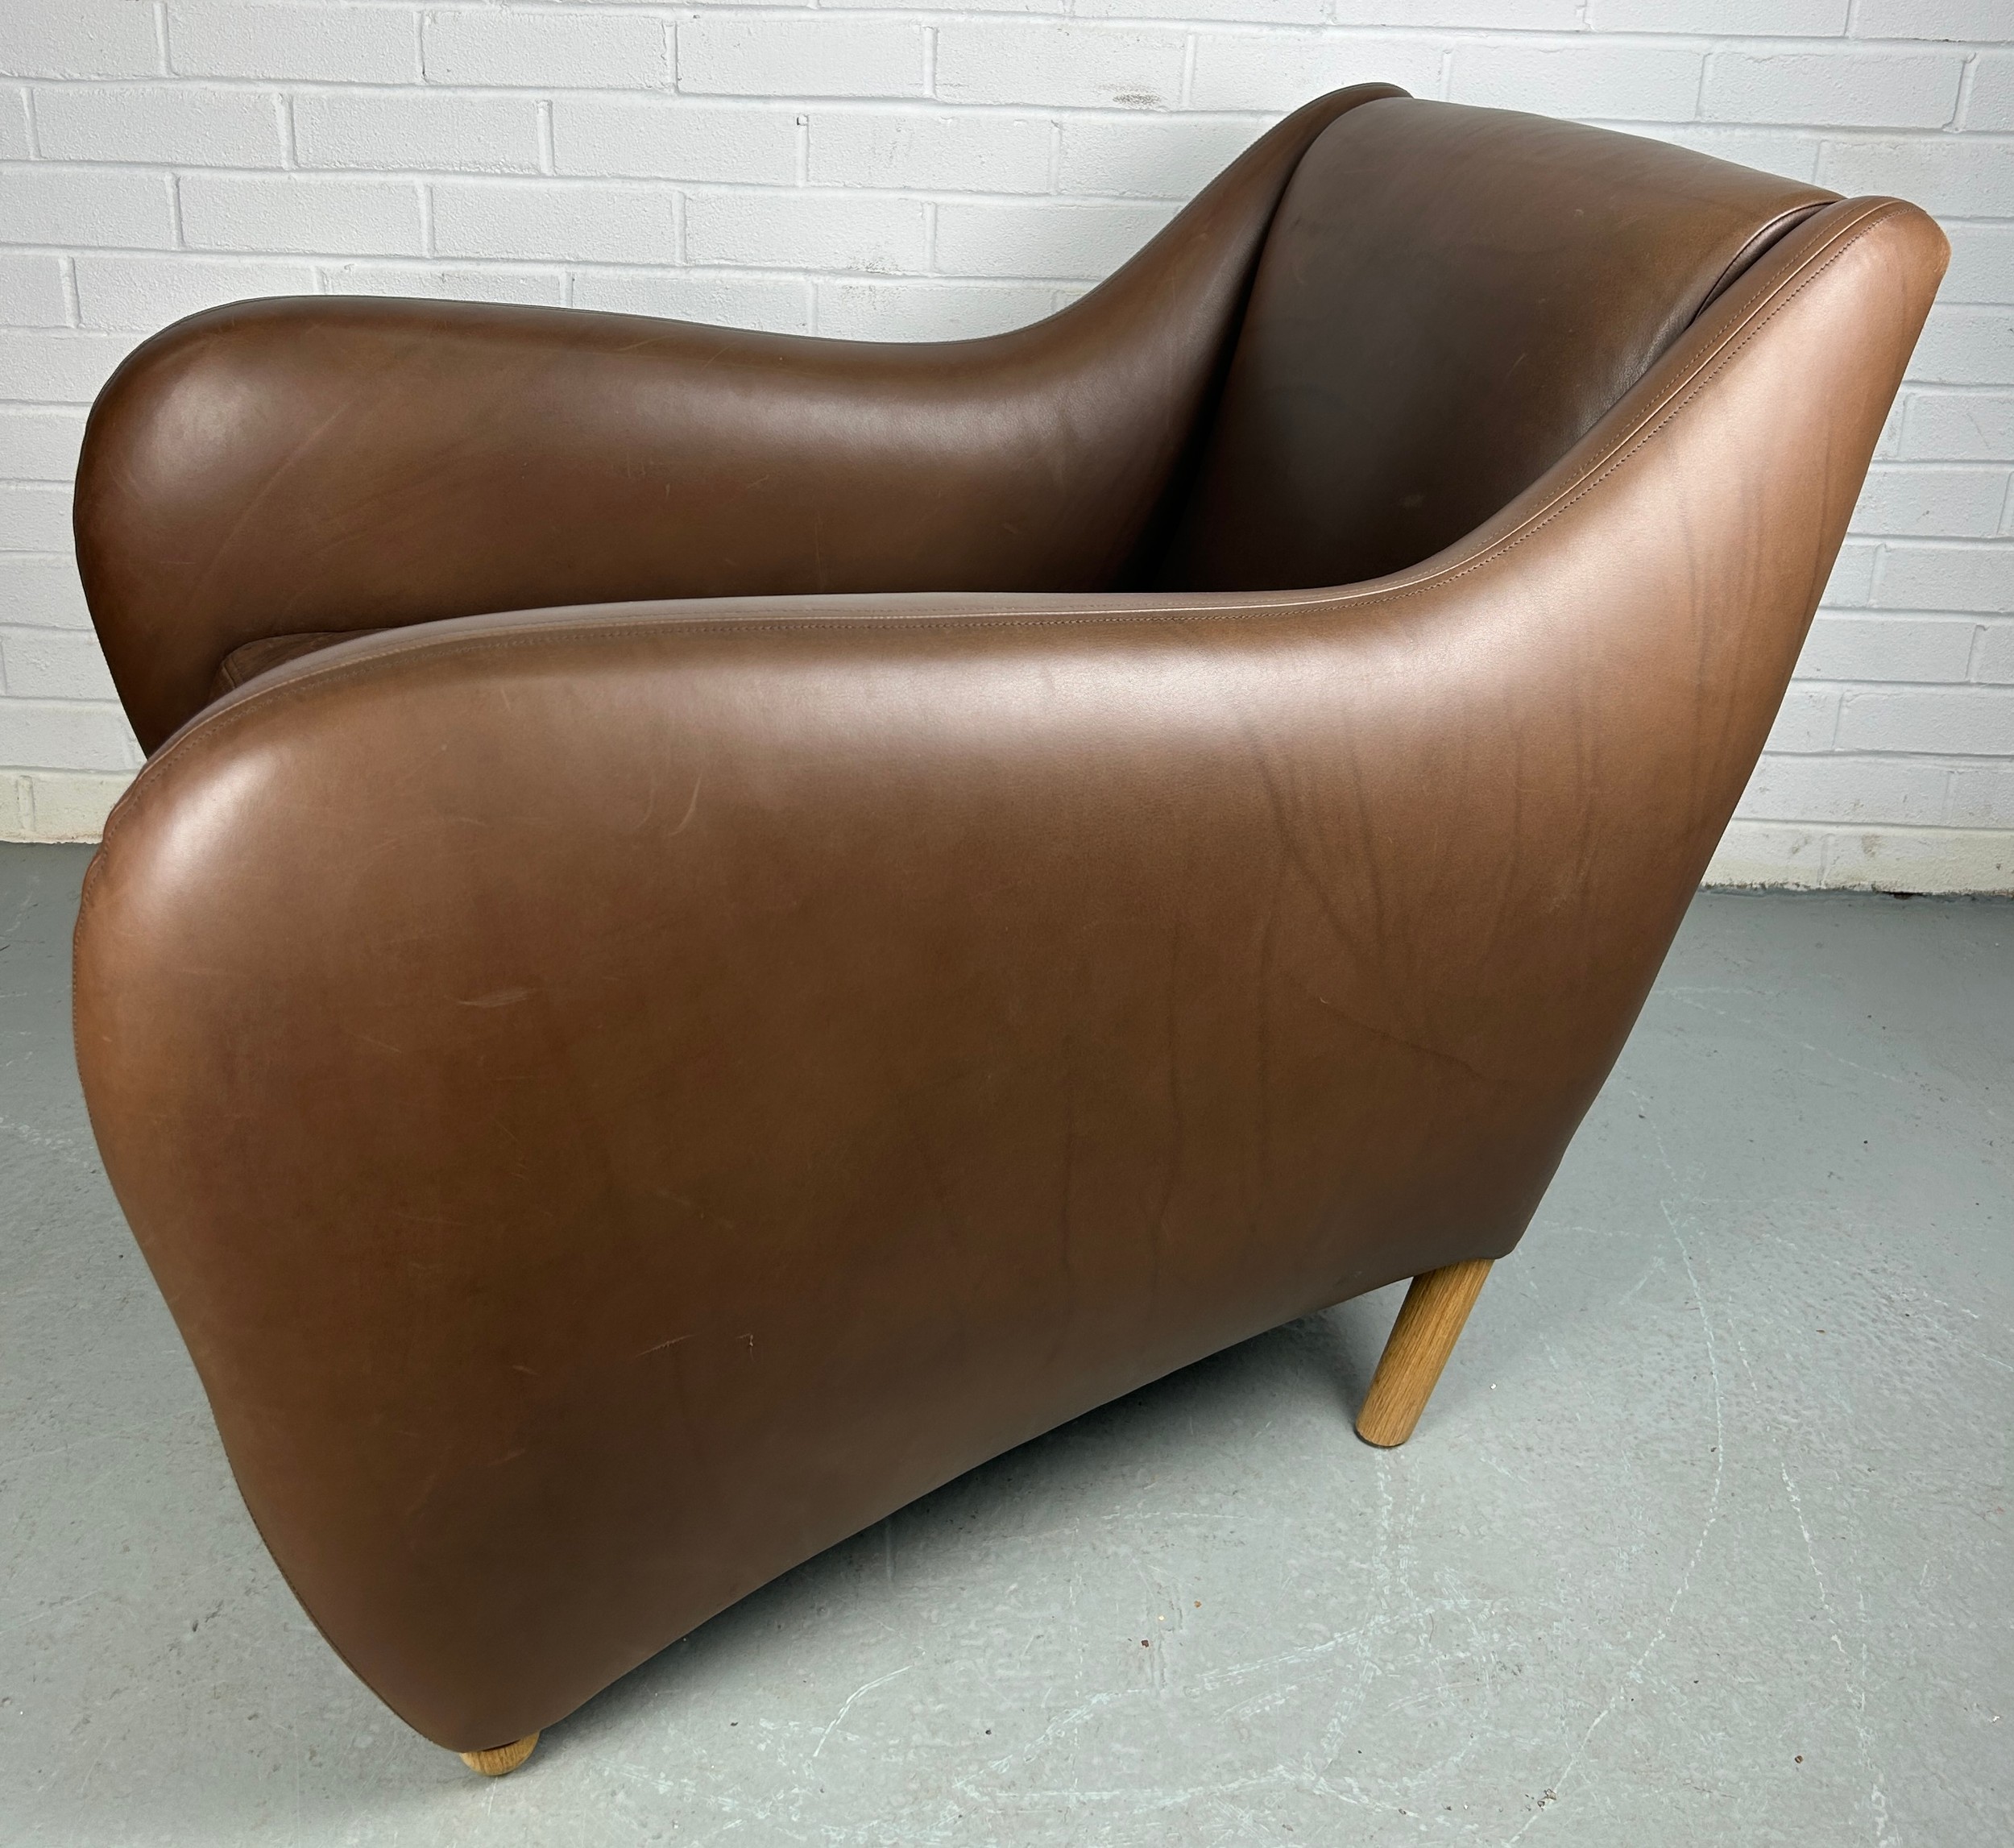 AN SCP BALZAC BROWN LEATHER ARMCHAIR AND FOOTSTOOL BY MATTHEW HILTON, Retailed by the Conran Shop. - Image 6 of 6